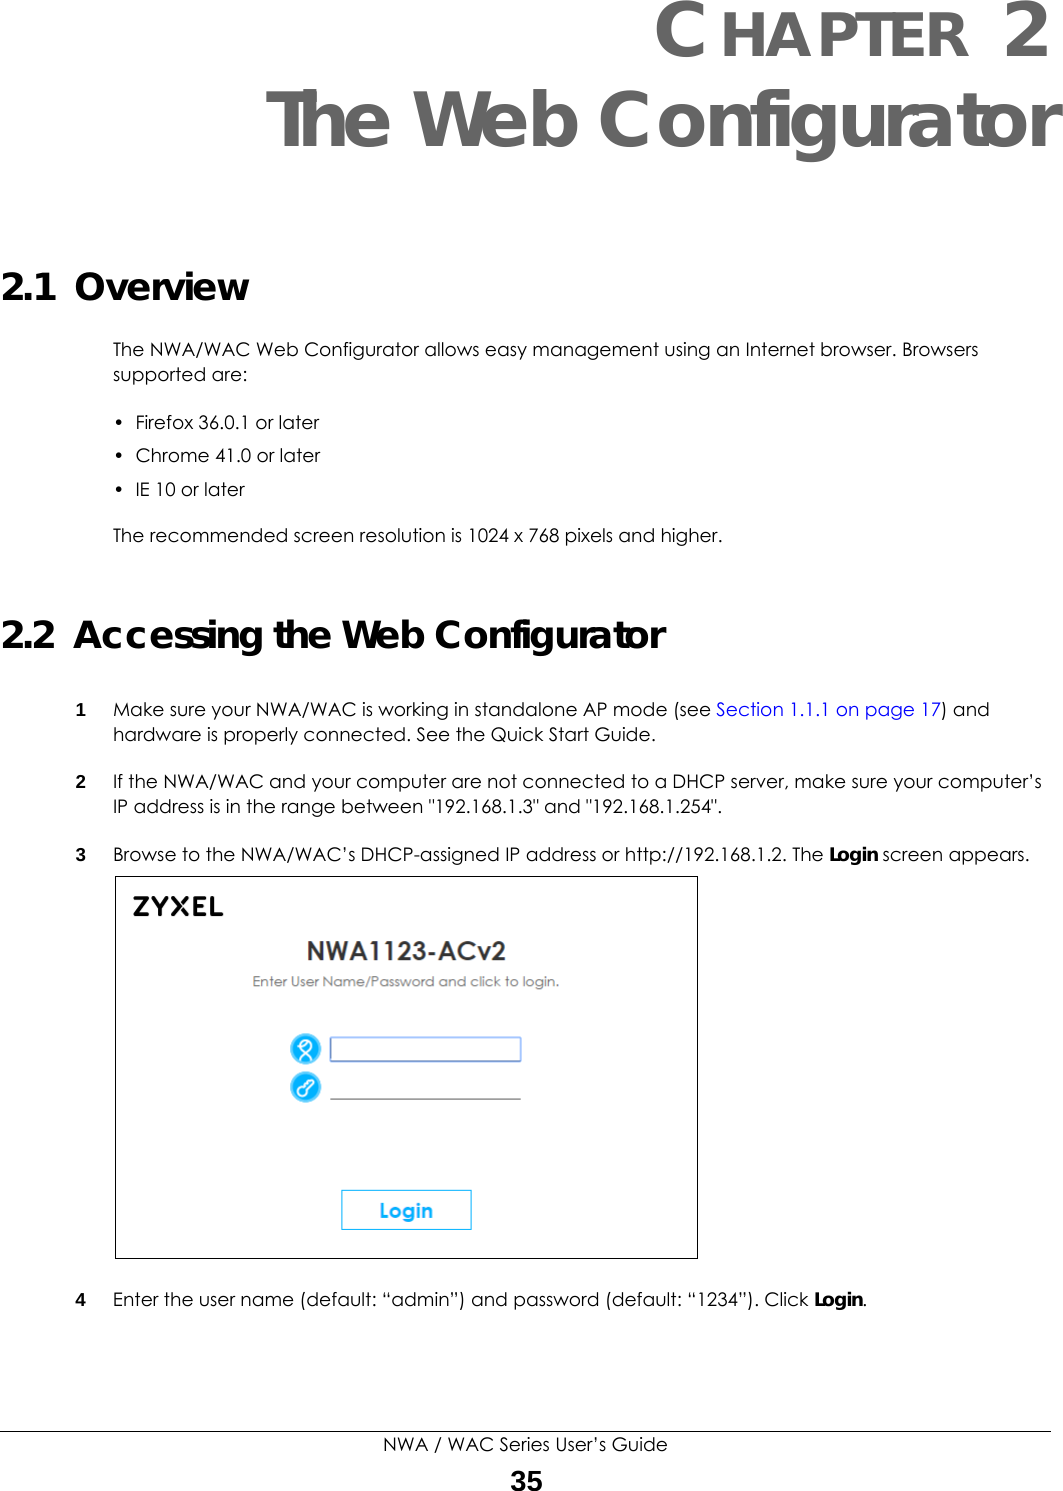 NWA / WAC Series User’s Guide35CHAPTER 2The Web Configurator2.1  OverviewThe NWA/WAC Web Configurator allows easy management using an Internet browser. Browsers supported are:• Firefox 36.0.1 or later• Chrome 41.0 or later• IE 10 or laterThe recommended screen resolution is 1024 x 768 pixels and higher.2.2  Accessing the Web Configurator1Make sure your NWA/WAC is working in standalone AP mode (see Section 1.1.1 on page 17) and hardware is properly connected. See the Quick Start Guide.2If the NWA/WAC and your computer are not connected to a DHCP server, make sure your computer’s IP address is in the range between &quot;192.168.1.3&quot; and &quot;192.168.1.254&quot;.3Browse to the NWA/WAC’s DHCP-assigned IP address or http://192.168.1.2. The Login screen appears. 4Enter the user name (default: “admin”) and password (default: “1234”). Click Login. 